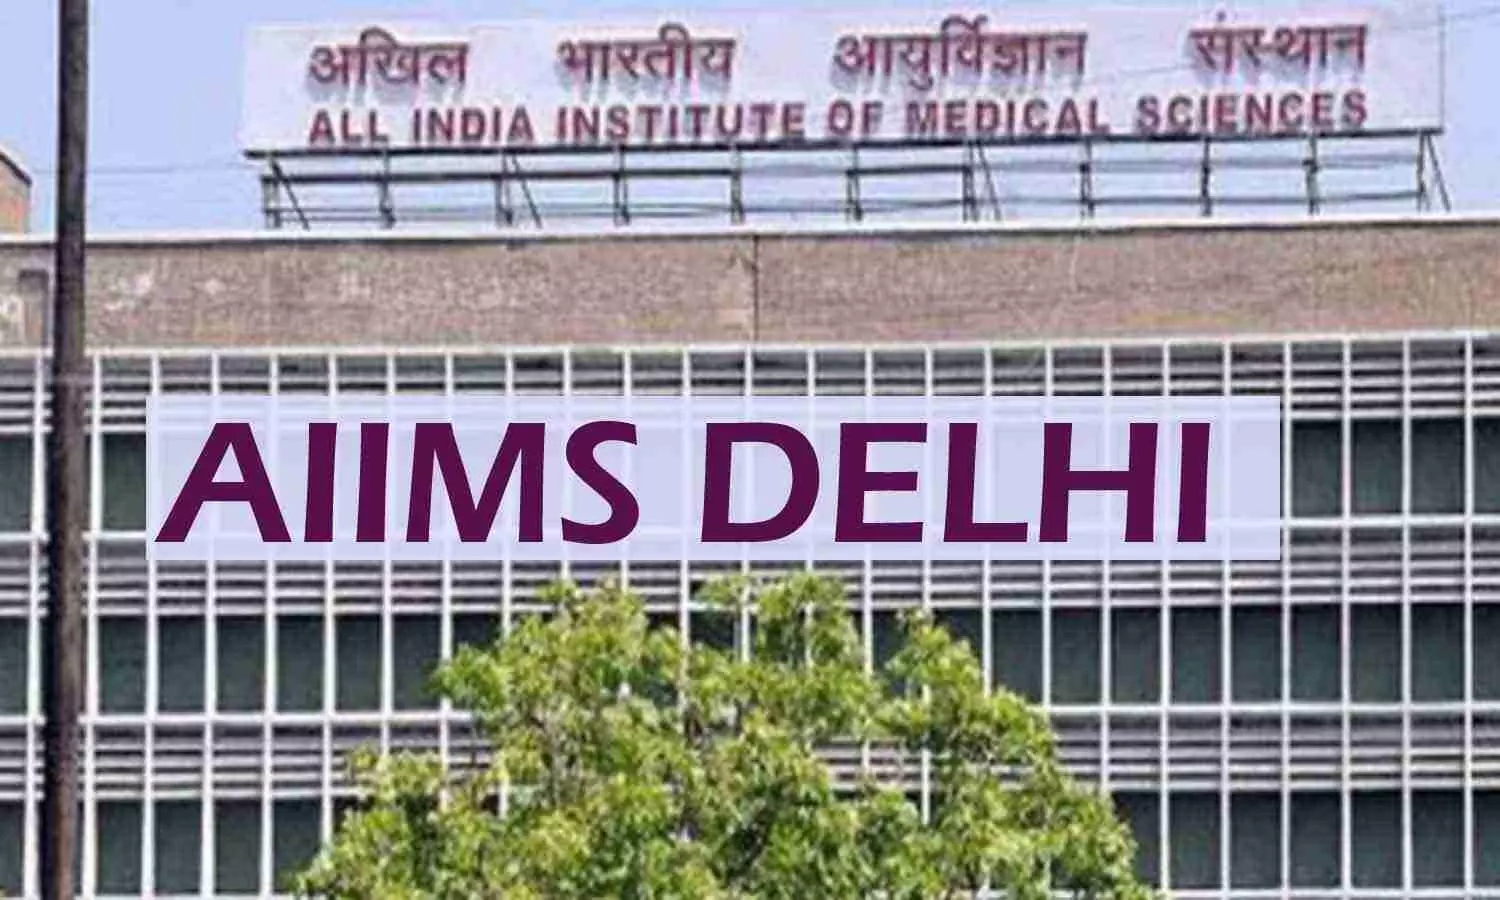 Where will Trauma patients go? AIIMS Trauma Centre Should not be converted to COVID-19 Facility, says RDA